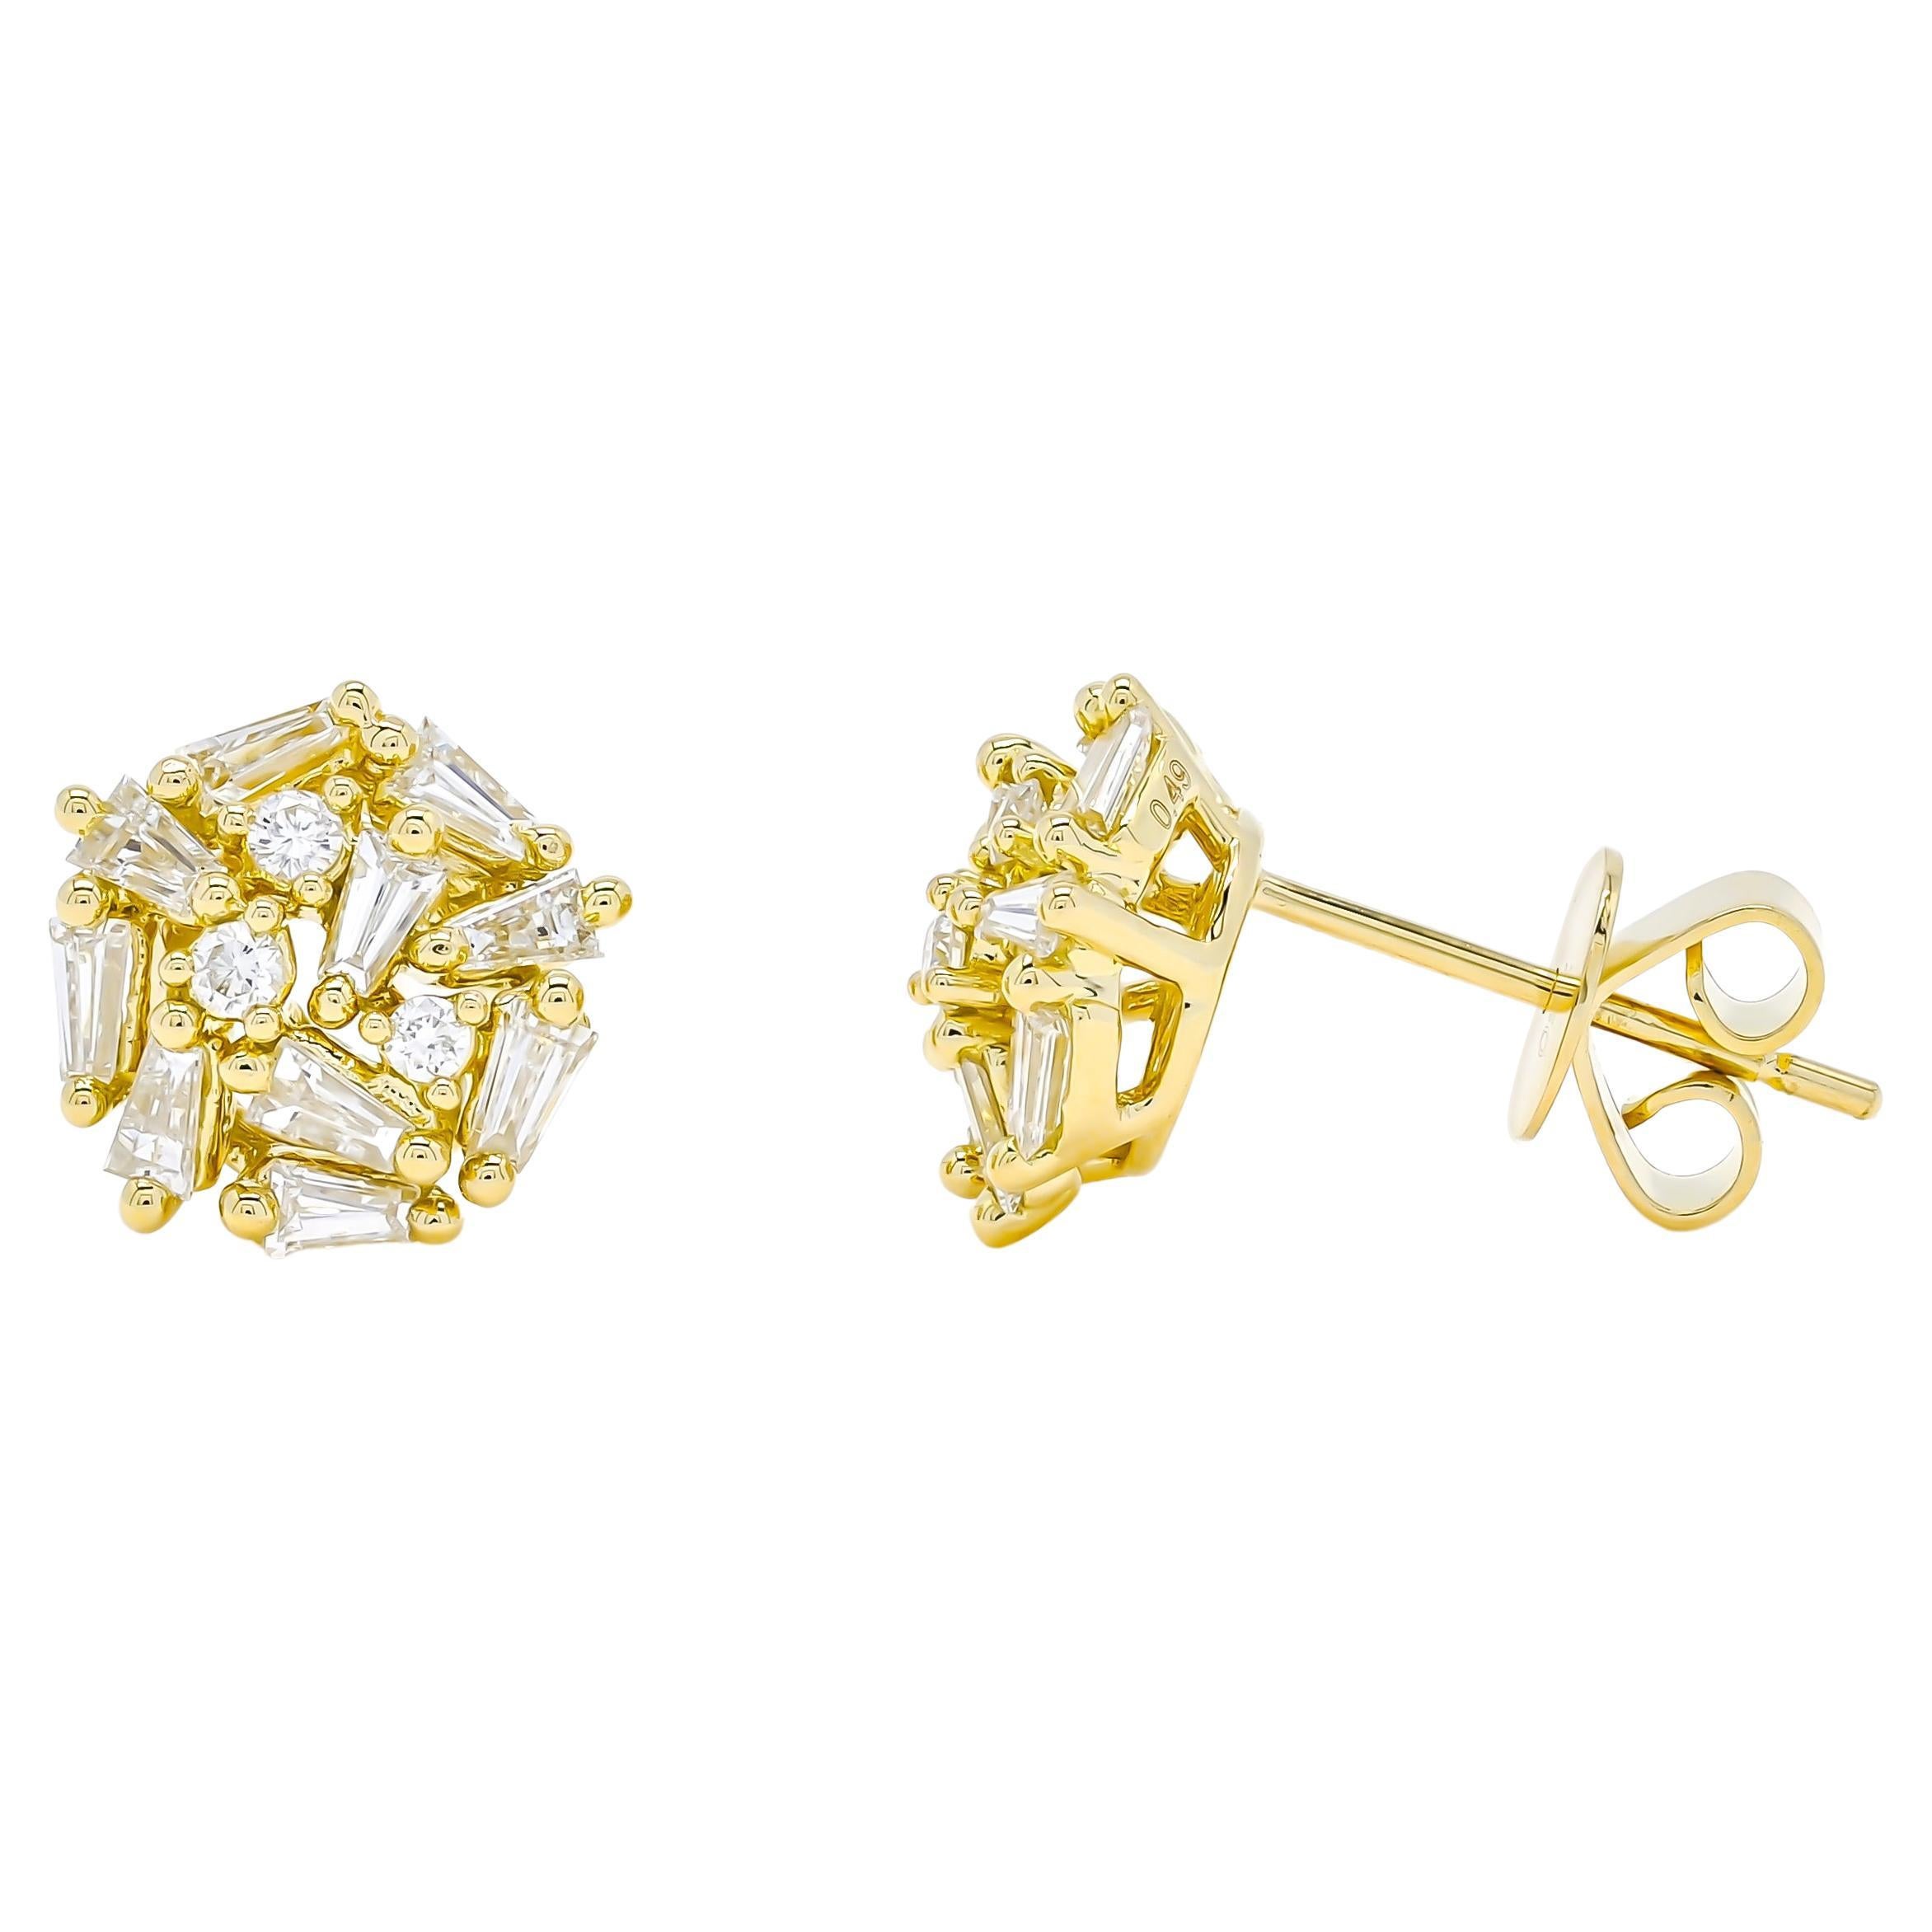  Natural Diamond Earrings 0.96 cts 18 Karat Yellow Gold Cluster Stud Earrings For Sale